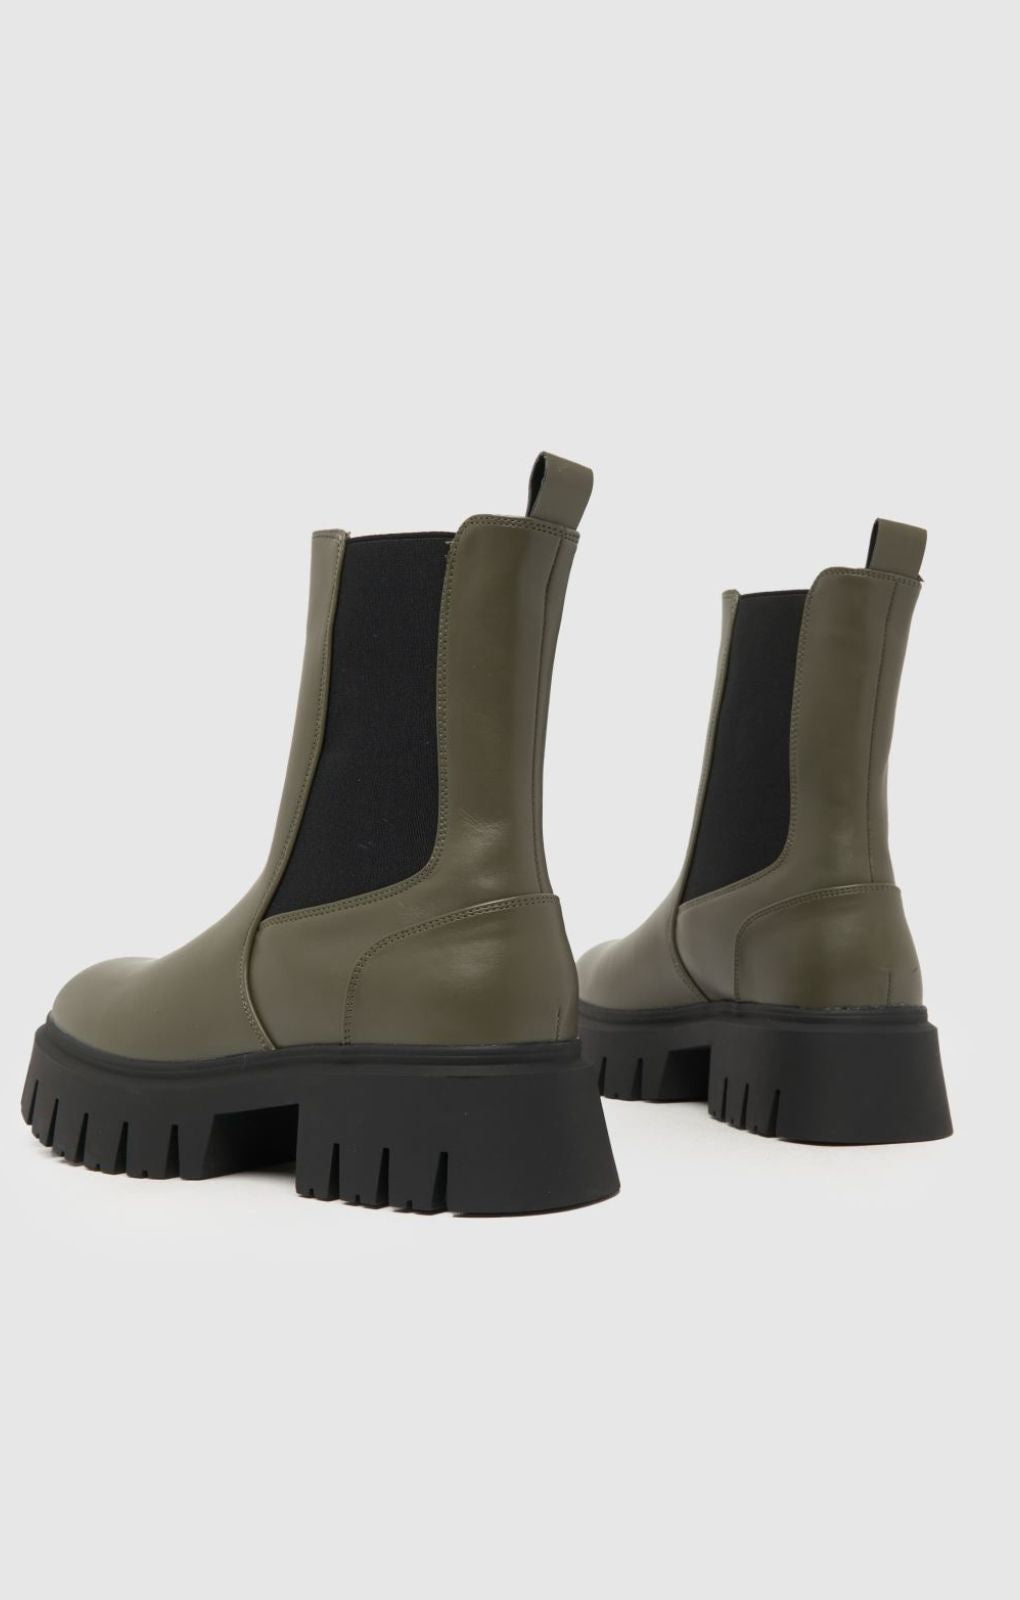 Schuh Amsterdam Chunky Chelsea Boots in Khaki product image